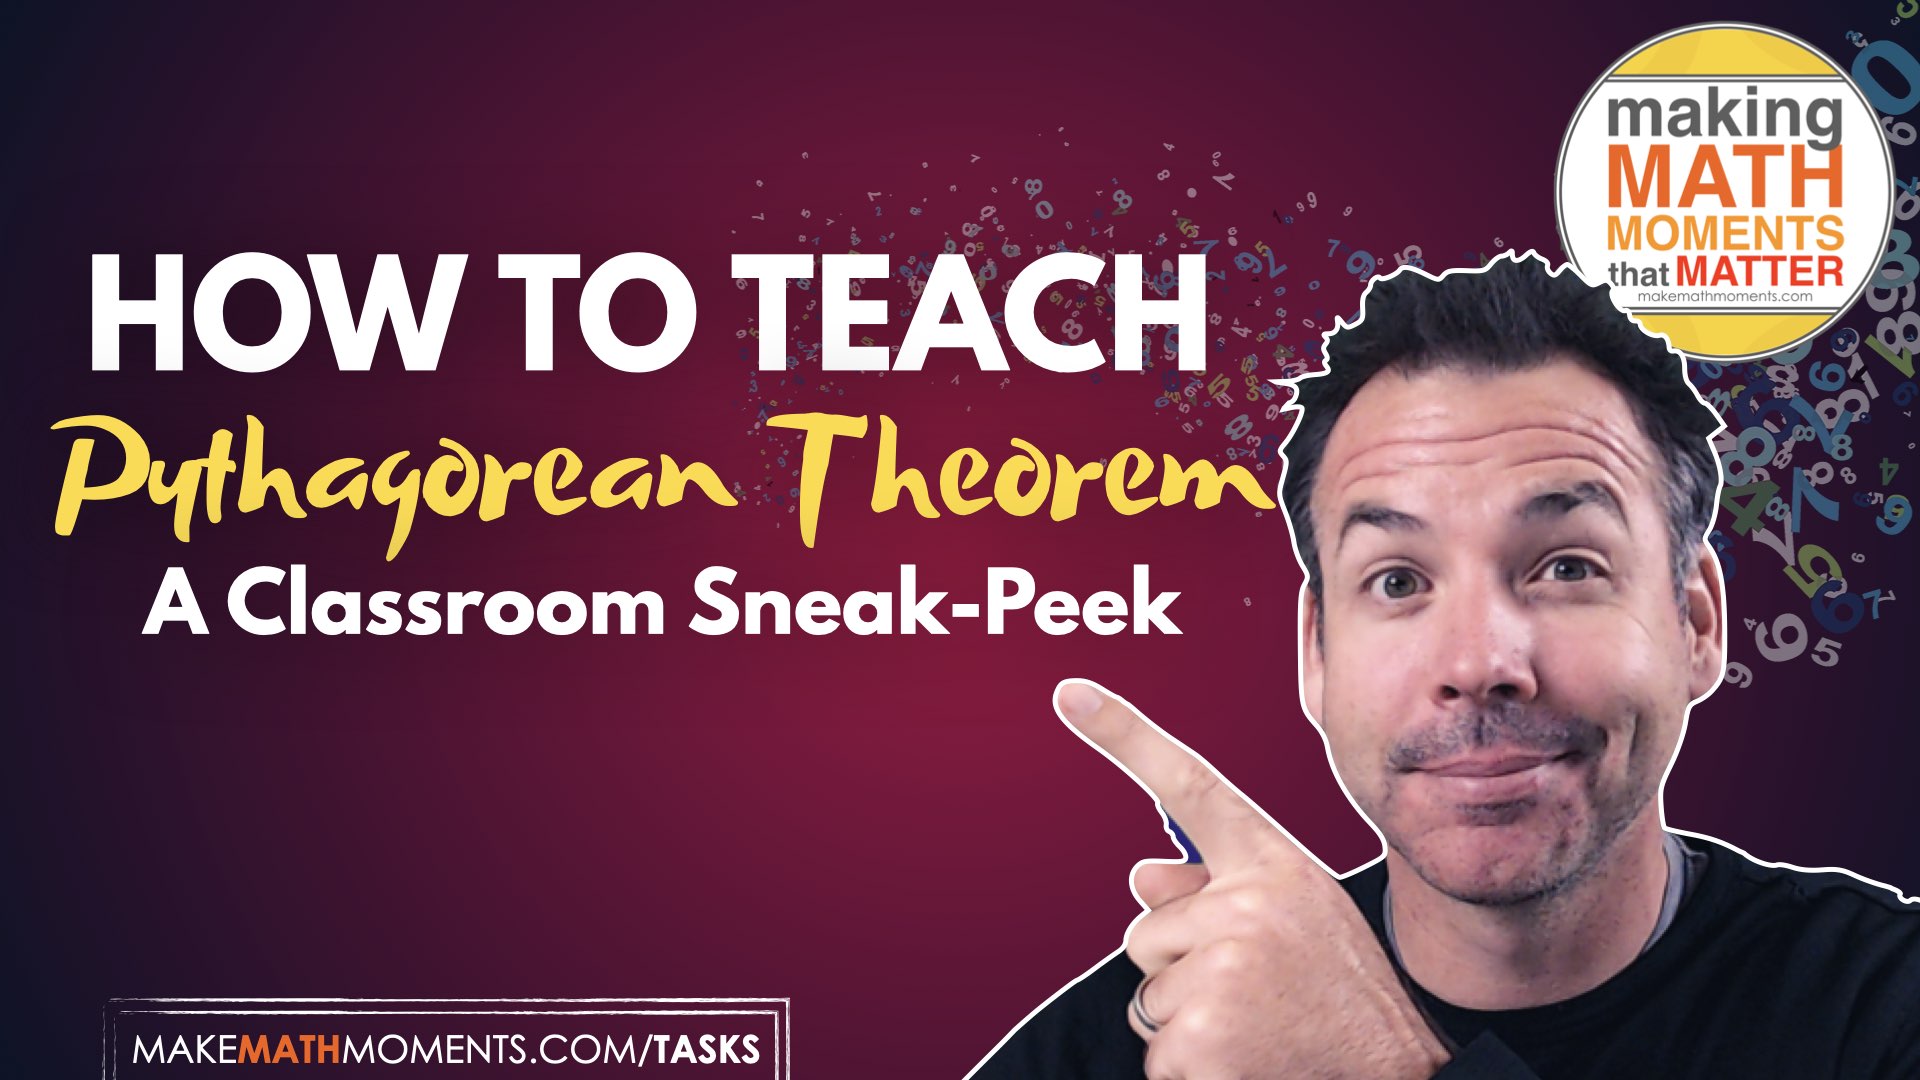 How To Introduce The Pythagorean Theorem